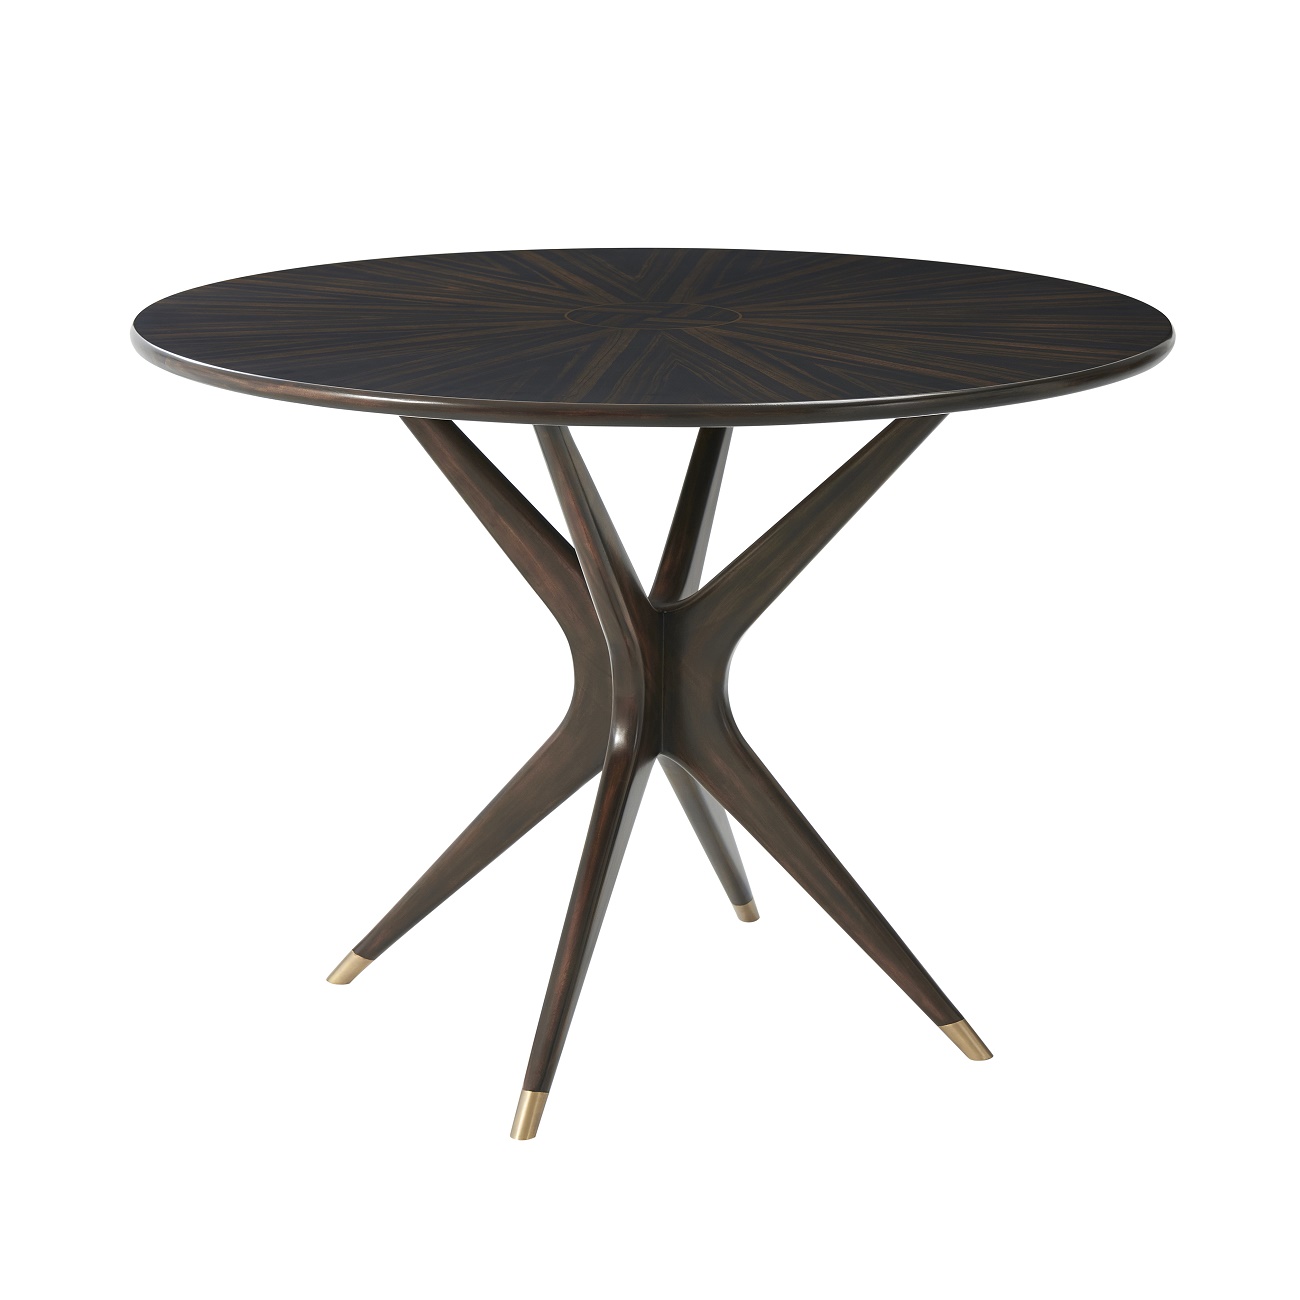 Perfection Center Table, Theodore Alexander Table, Brooklyn, New York, Furniture by ABD